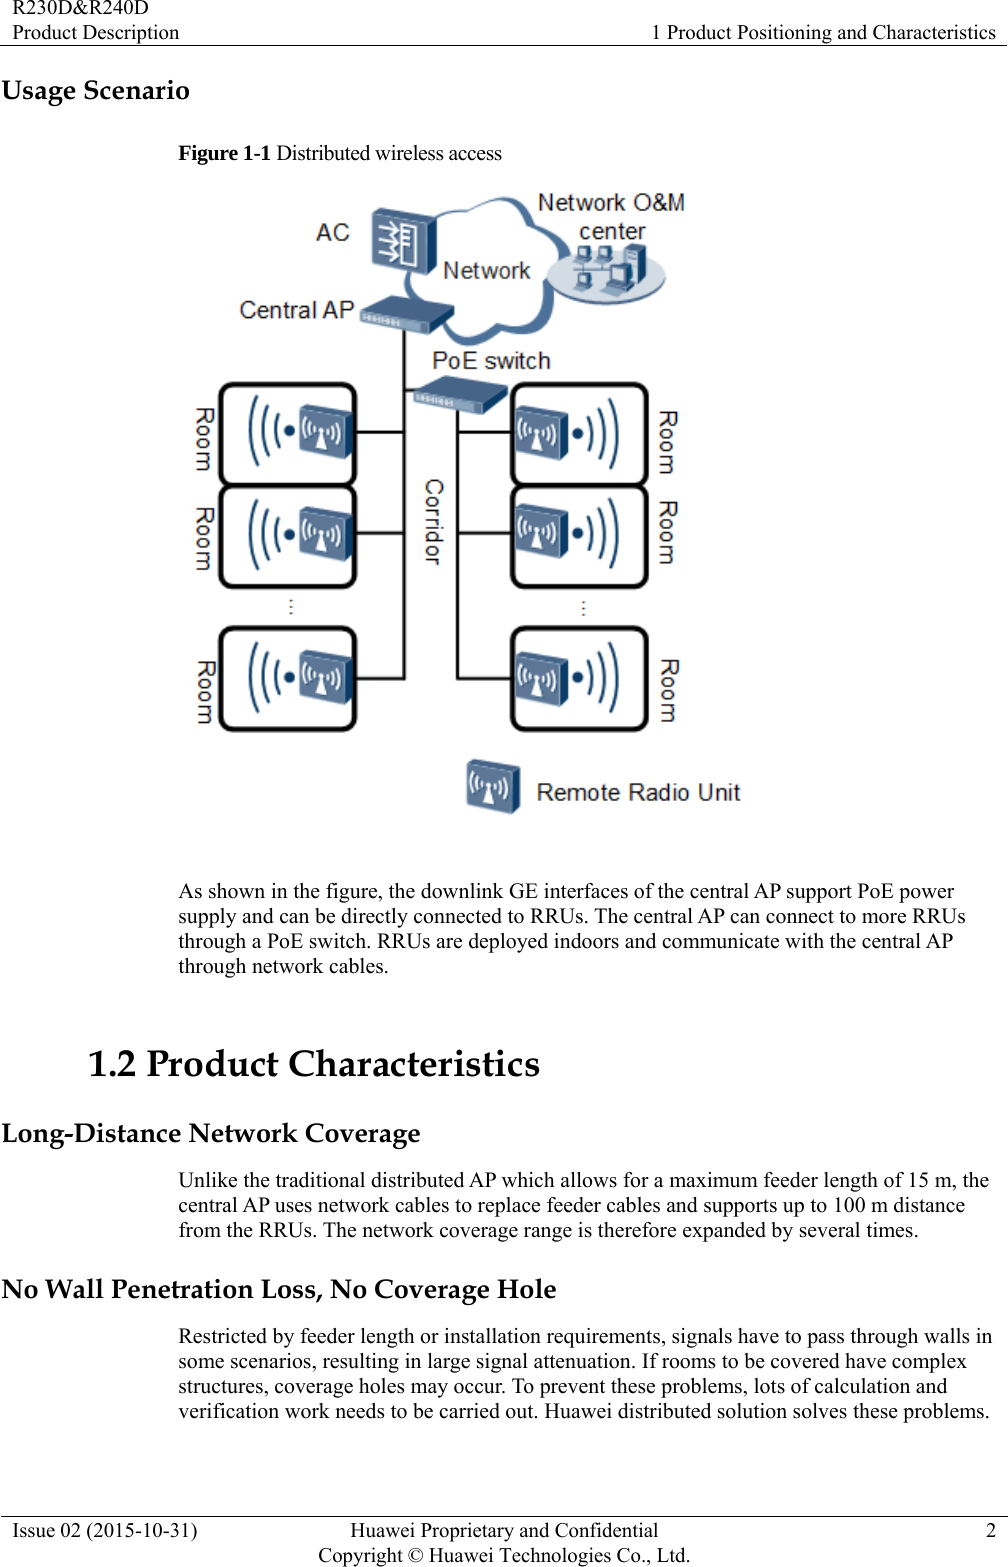 R230D&amp;R240D Product Description  1 Product Positioning and Characteristics Issue 02 (2015-10-31)  Huawei Proprietary and Confidential         Copyright © Huawei Technologies Co., Ltd.2 Usage Scenario Figure 1-1 Distributed wireless access   As shown in the figure, the downlink GE interfaces of the central AP support PoE power supply and can be directly connected to RRUs. The central AP can connect to more RRUs through a PoE switch. RRUs are deployed indoors and communicate with the central AP through network cables. 1.2 Product Characteristics Long-Distance Network Coverage Unlike the traditional distributed AP which allows for a maximum feeder length of 15 m, the central AP uses network cables to replace feeder cables and supports up to 100 m distance from the RRUs. The network coverage range is therefore expanded by several times. No Wall Penetration Loss, No Coverage Hole Restricted by feeder length or installation requirements, signals have to pass through walls in some scenarios, resulting in large signal attenuation. If rooms to be covered have complex structures, coverage holes may occur. To prevent these problems, lots of calculation and verification work needs to be carried out. Huawei distributed solution solves these problems. 